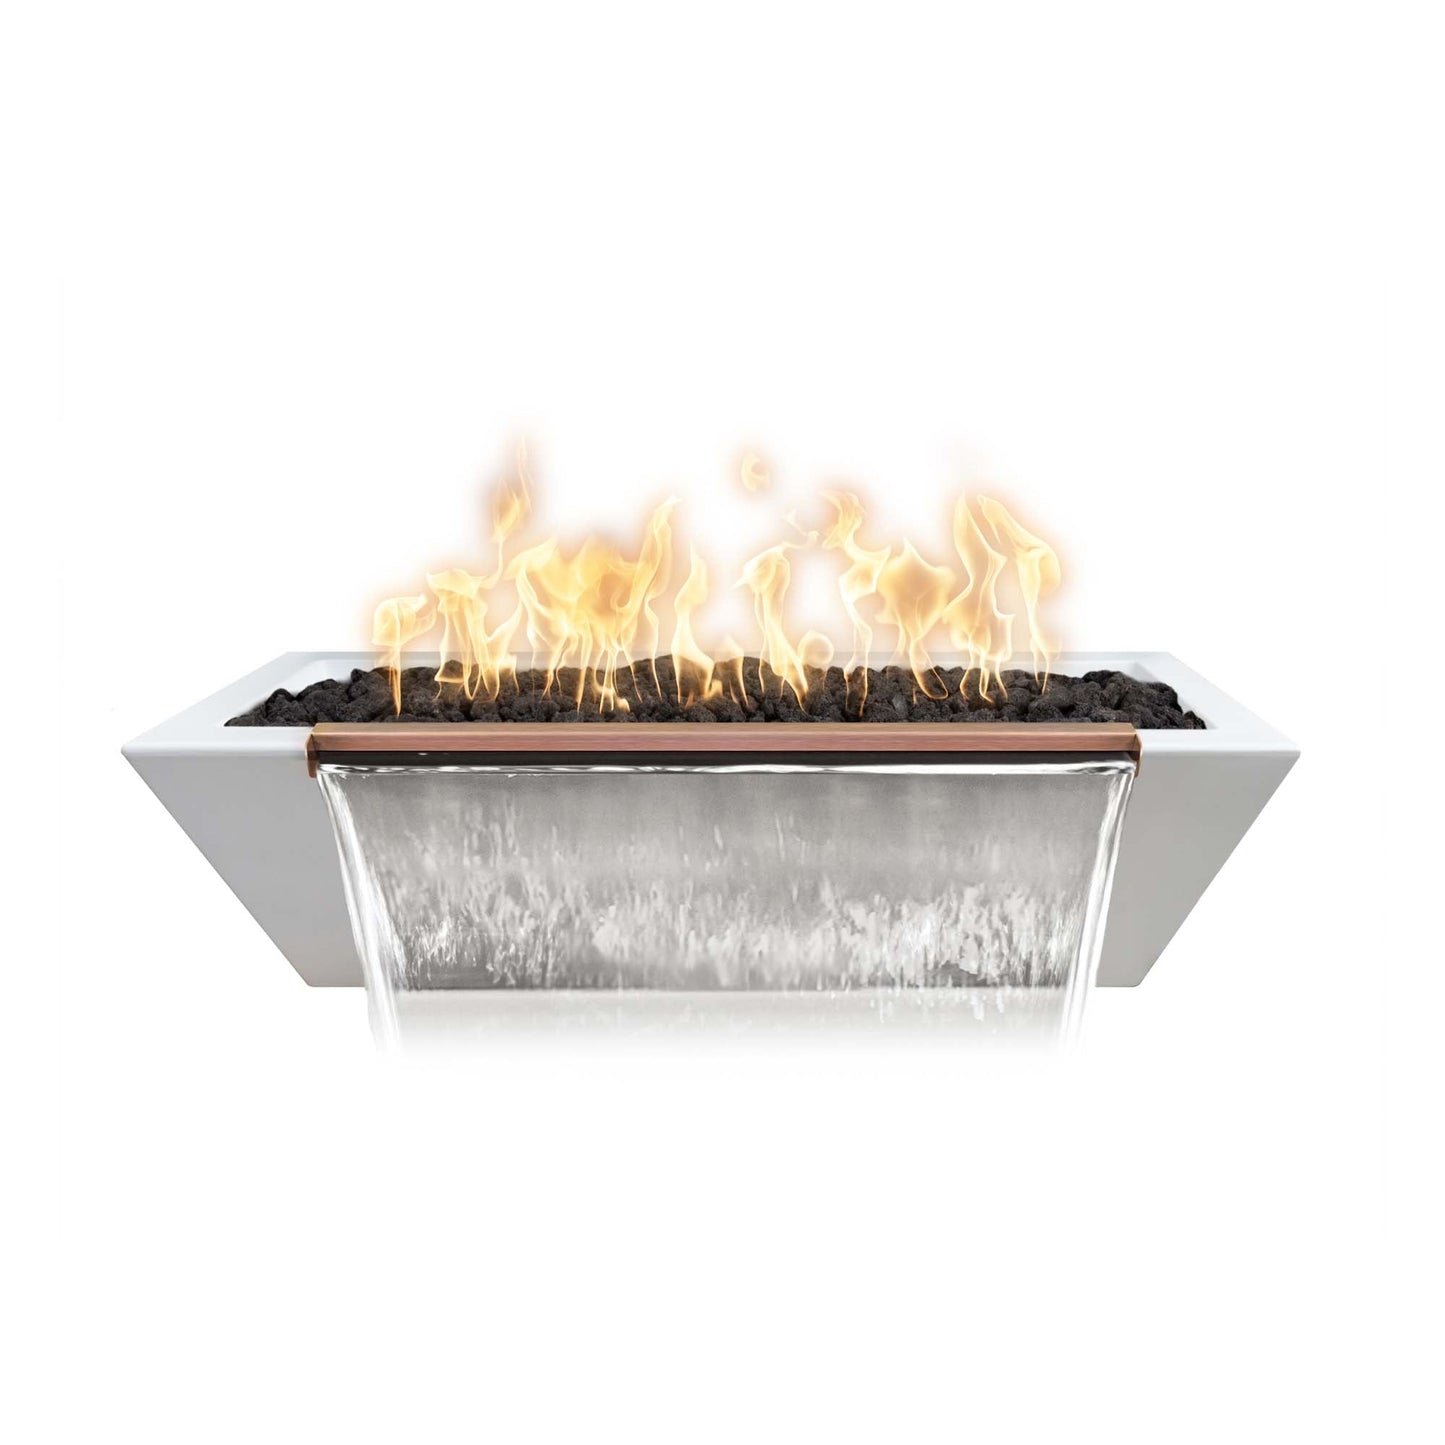 The Outdoor Plus Linear Maya 72" Brown GFRC Concrete Liquid Propane Fire & Water Bowl with Match Lit with Flame Sense Ignition